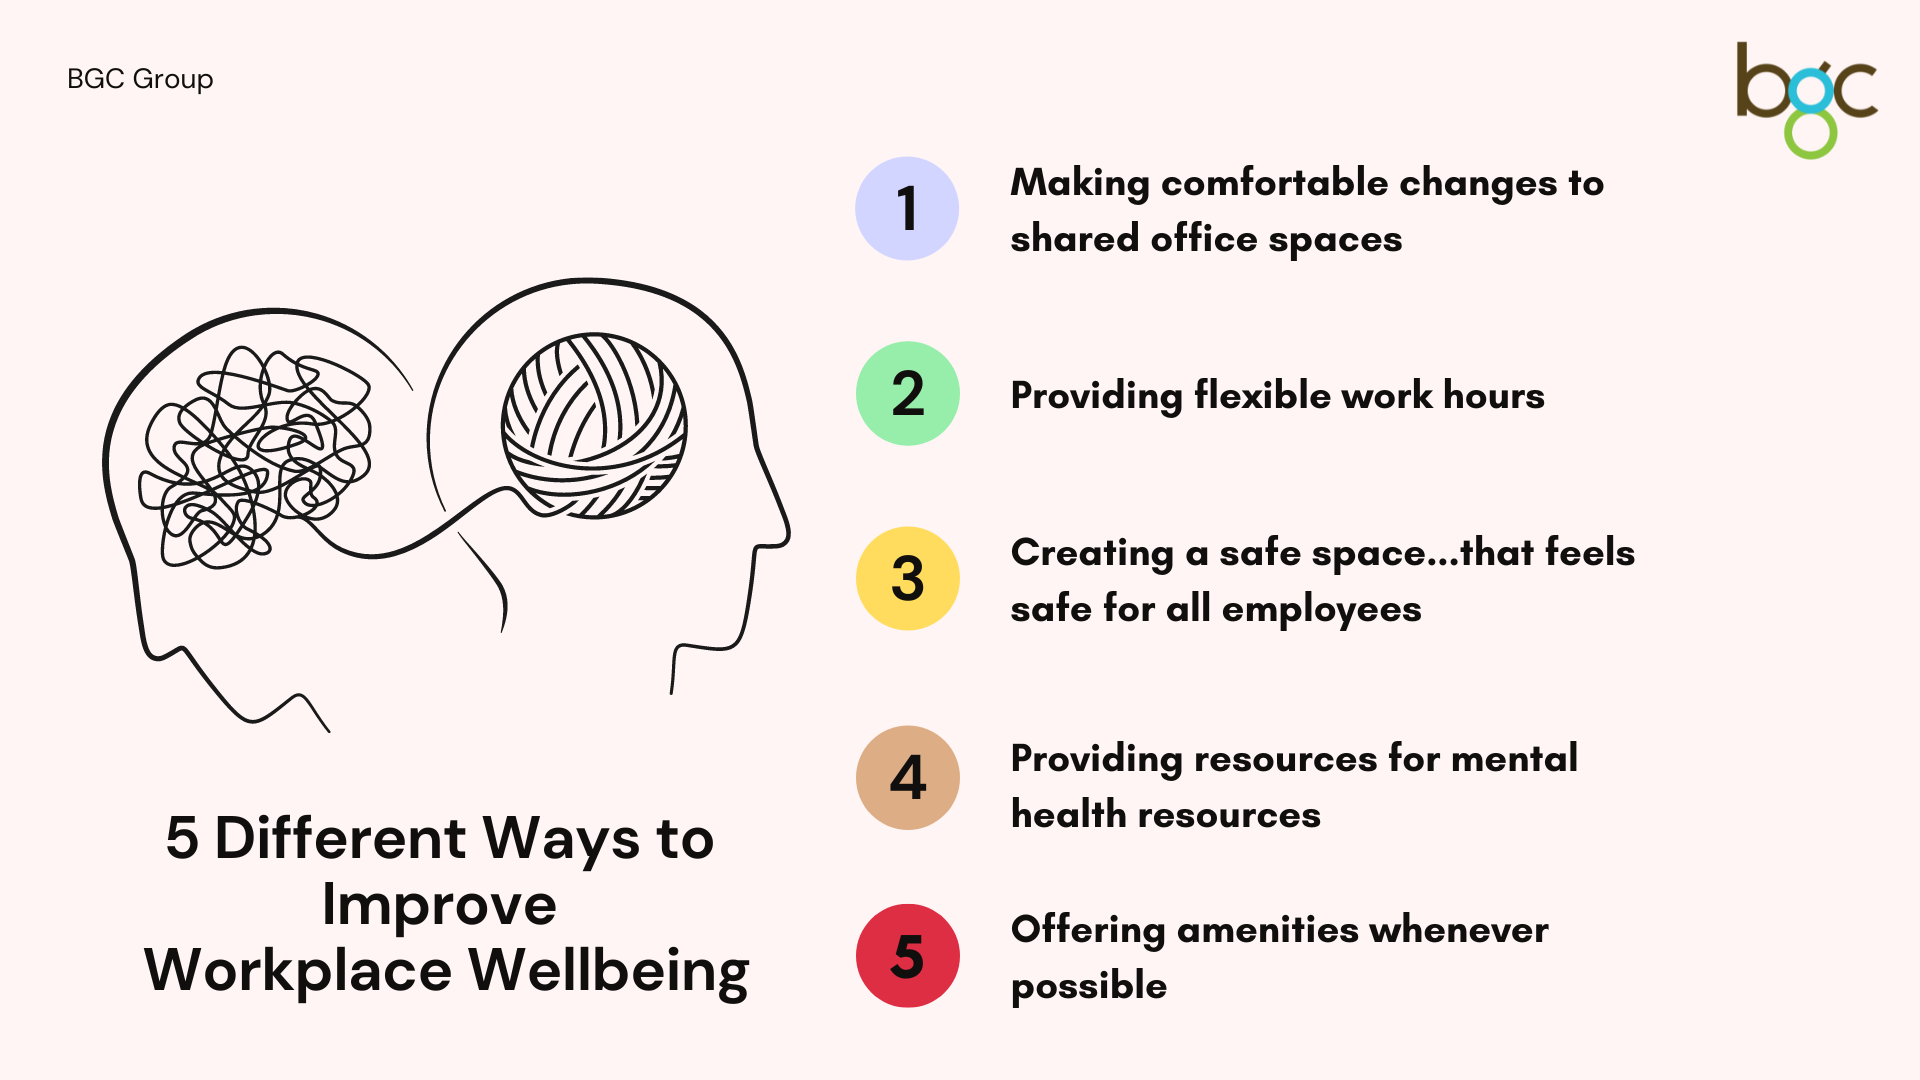 5 ways to improve workplace wellbeing in Singapore